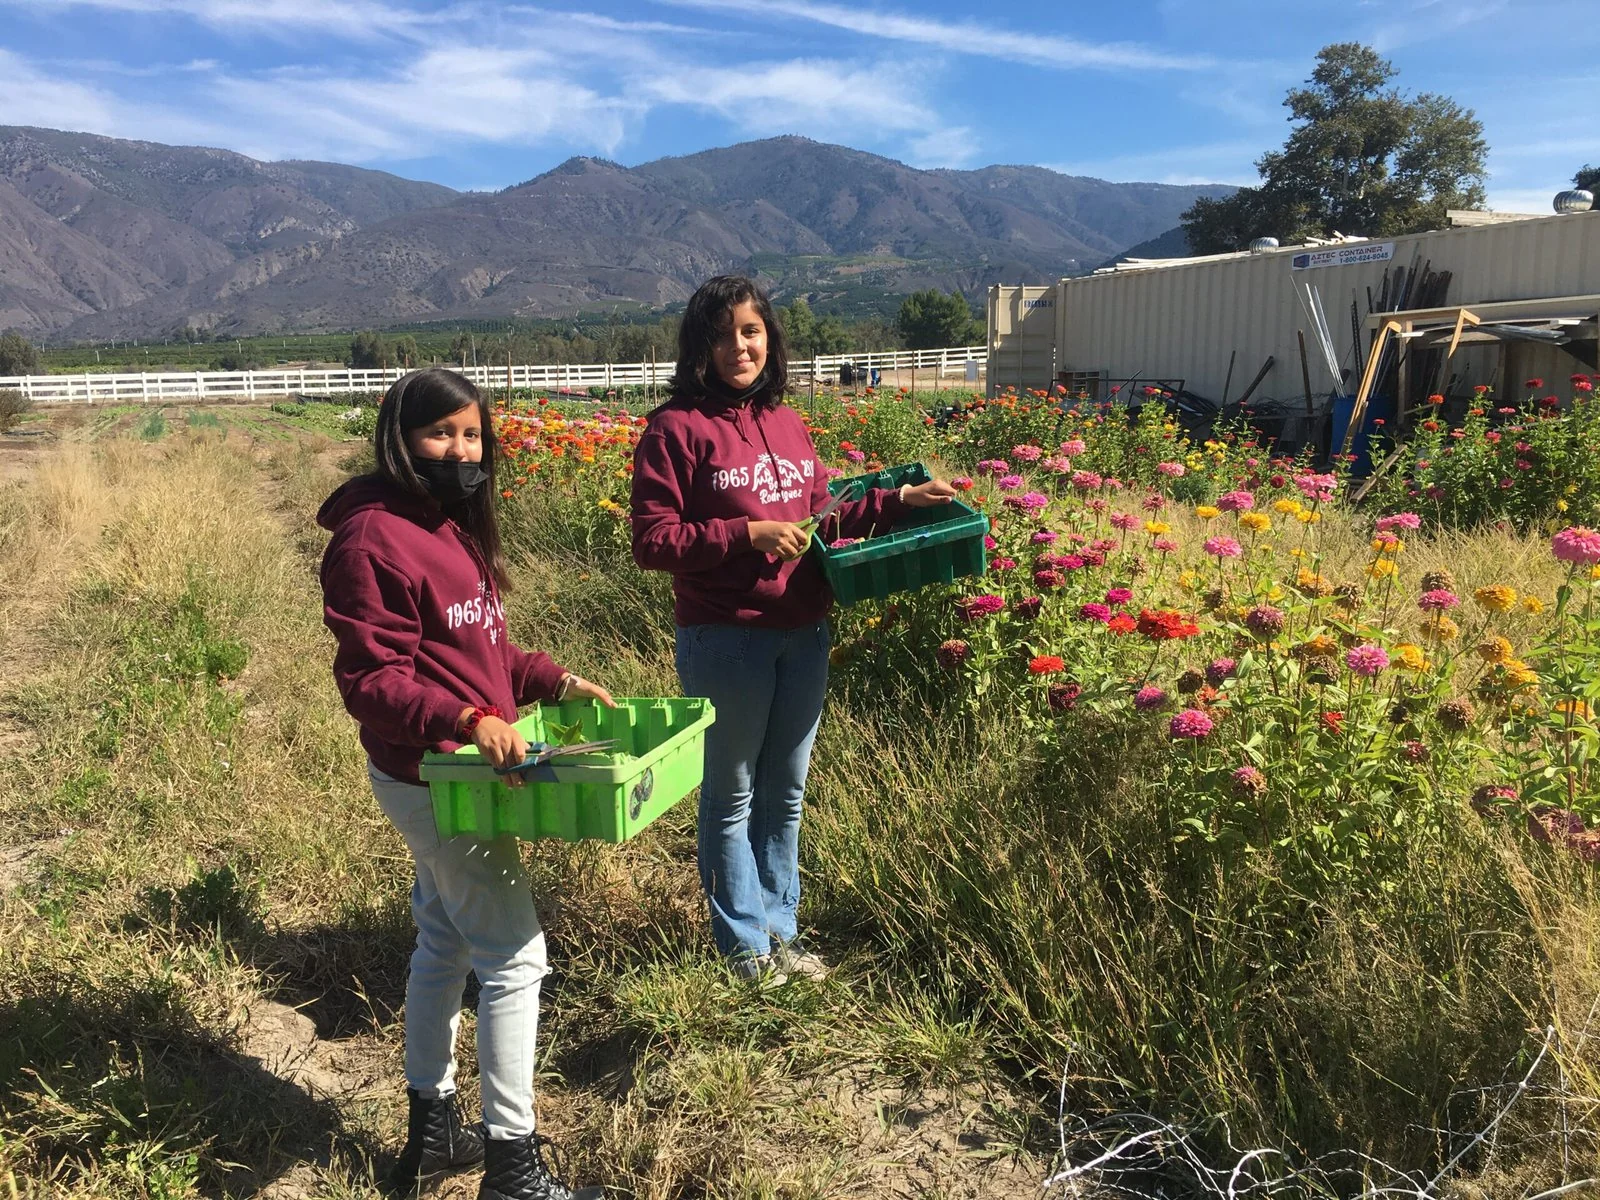 Two young women mid-harvest, standing by rows of flowers.